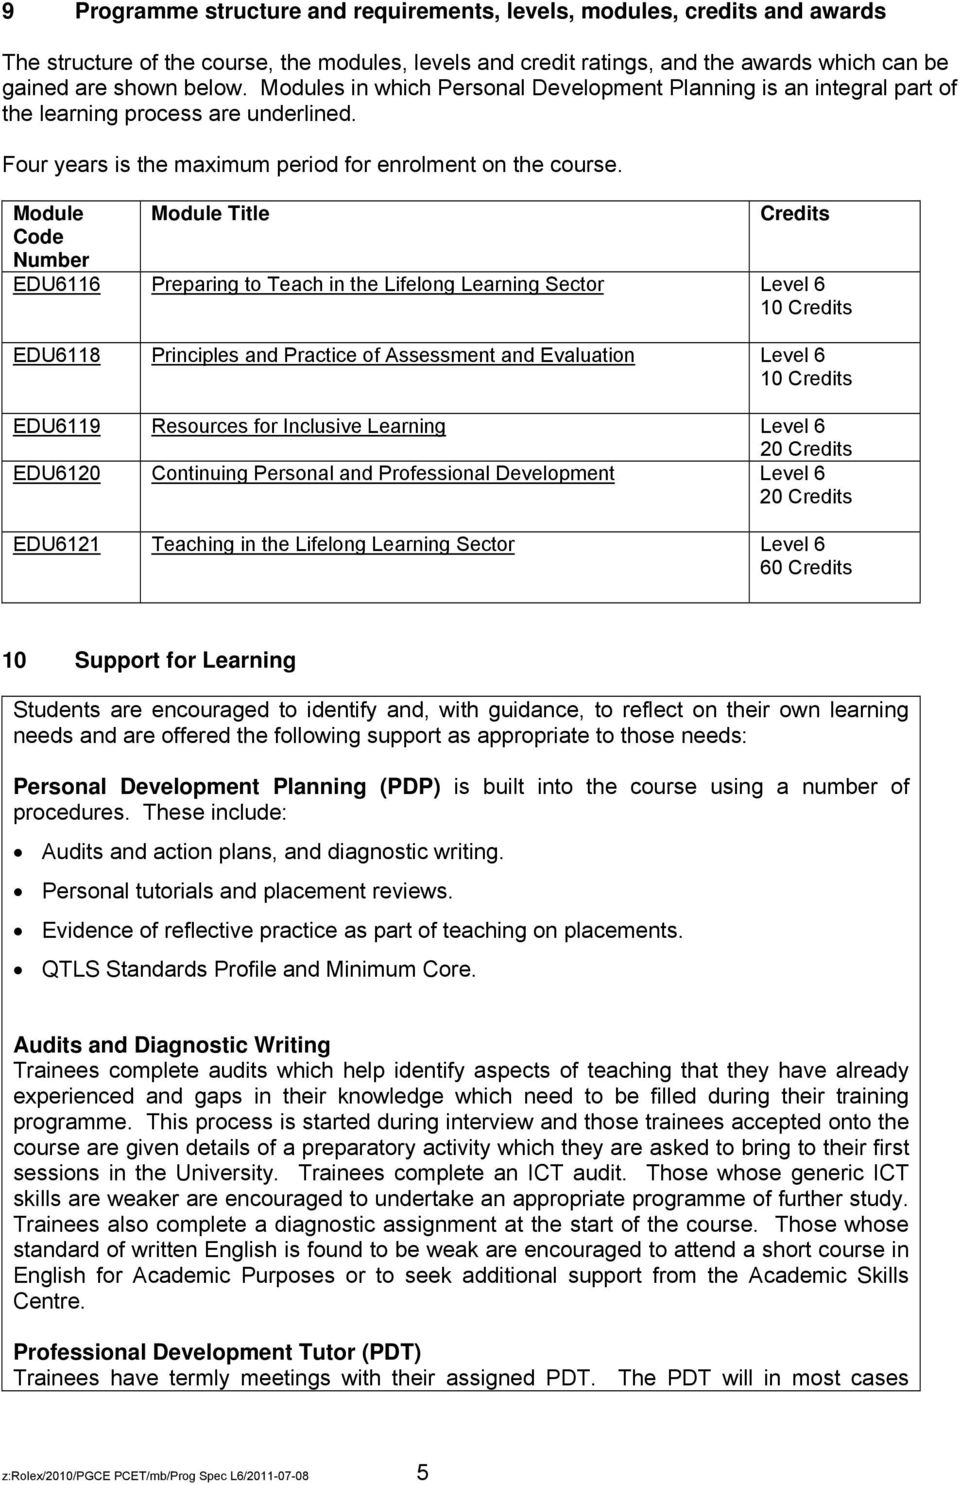 Module Module Title Credits Code Number EDU6116 Preparing to Teach in the Lifelong Learning Sector Level 6 10 Credits EDU6118 Principles and Practice of Assessment and Evaluation Level 6 10 Credits